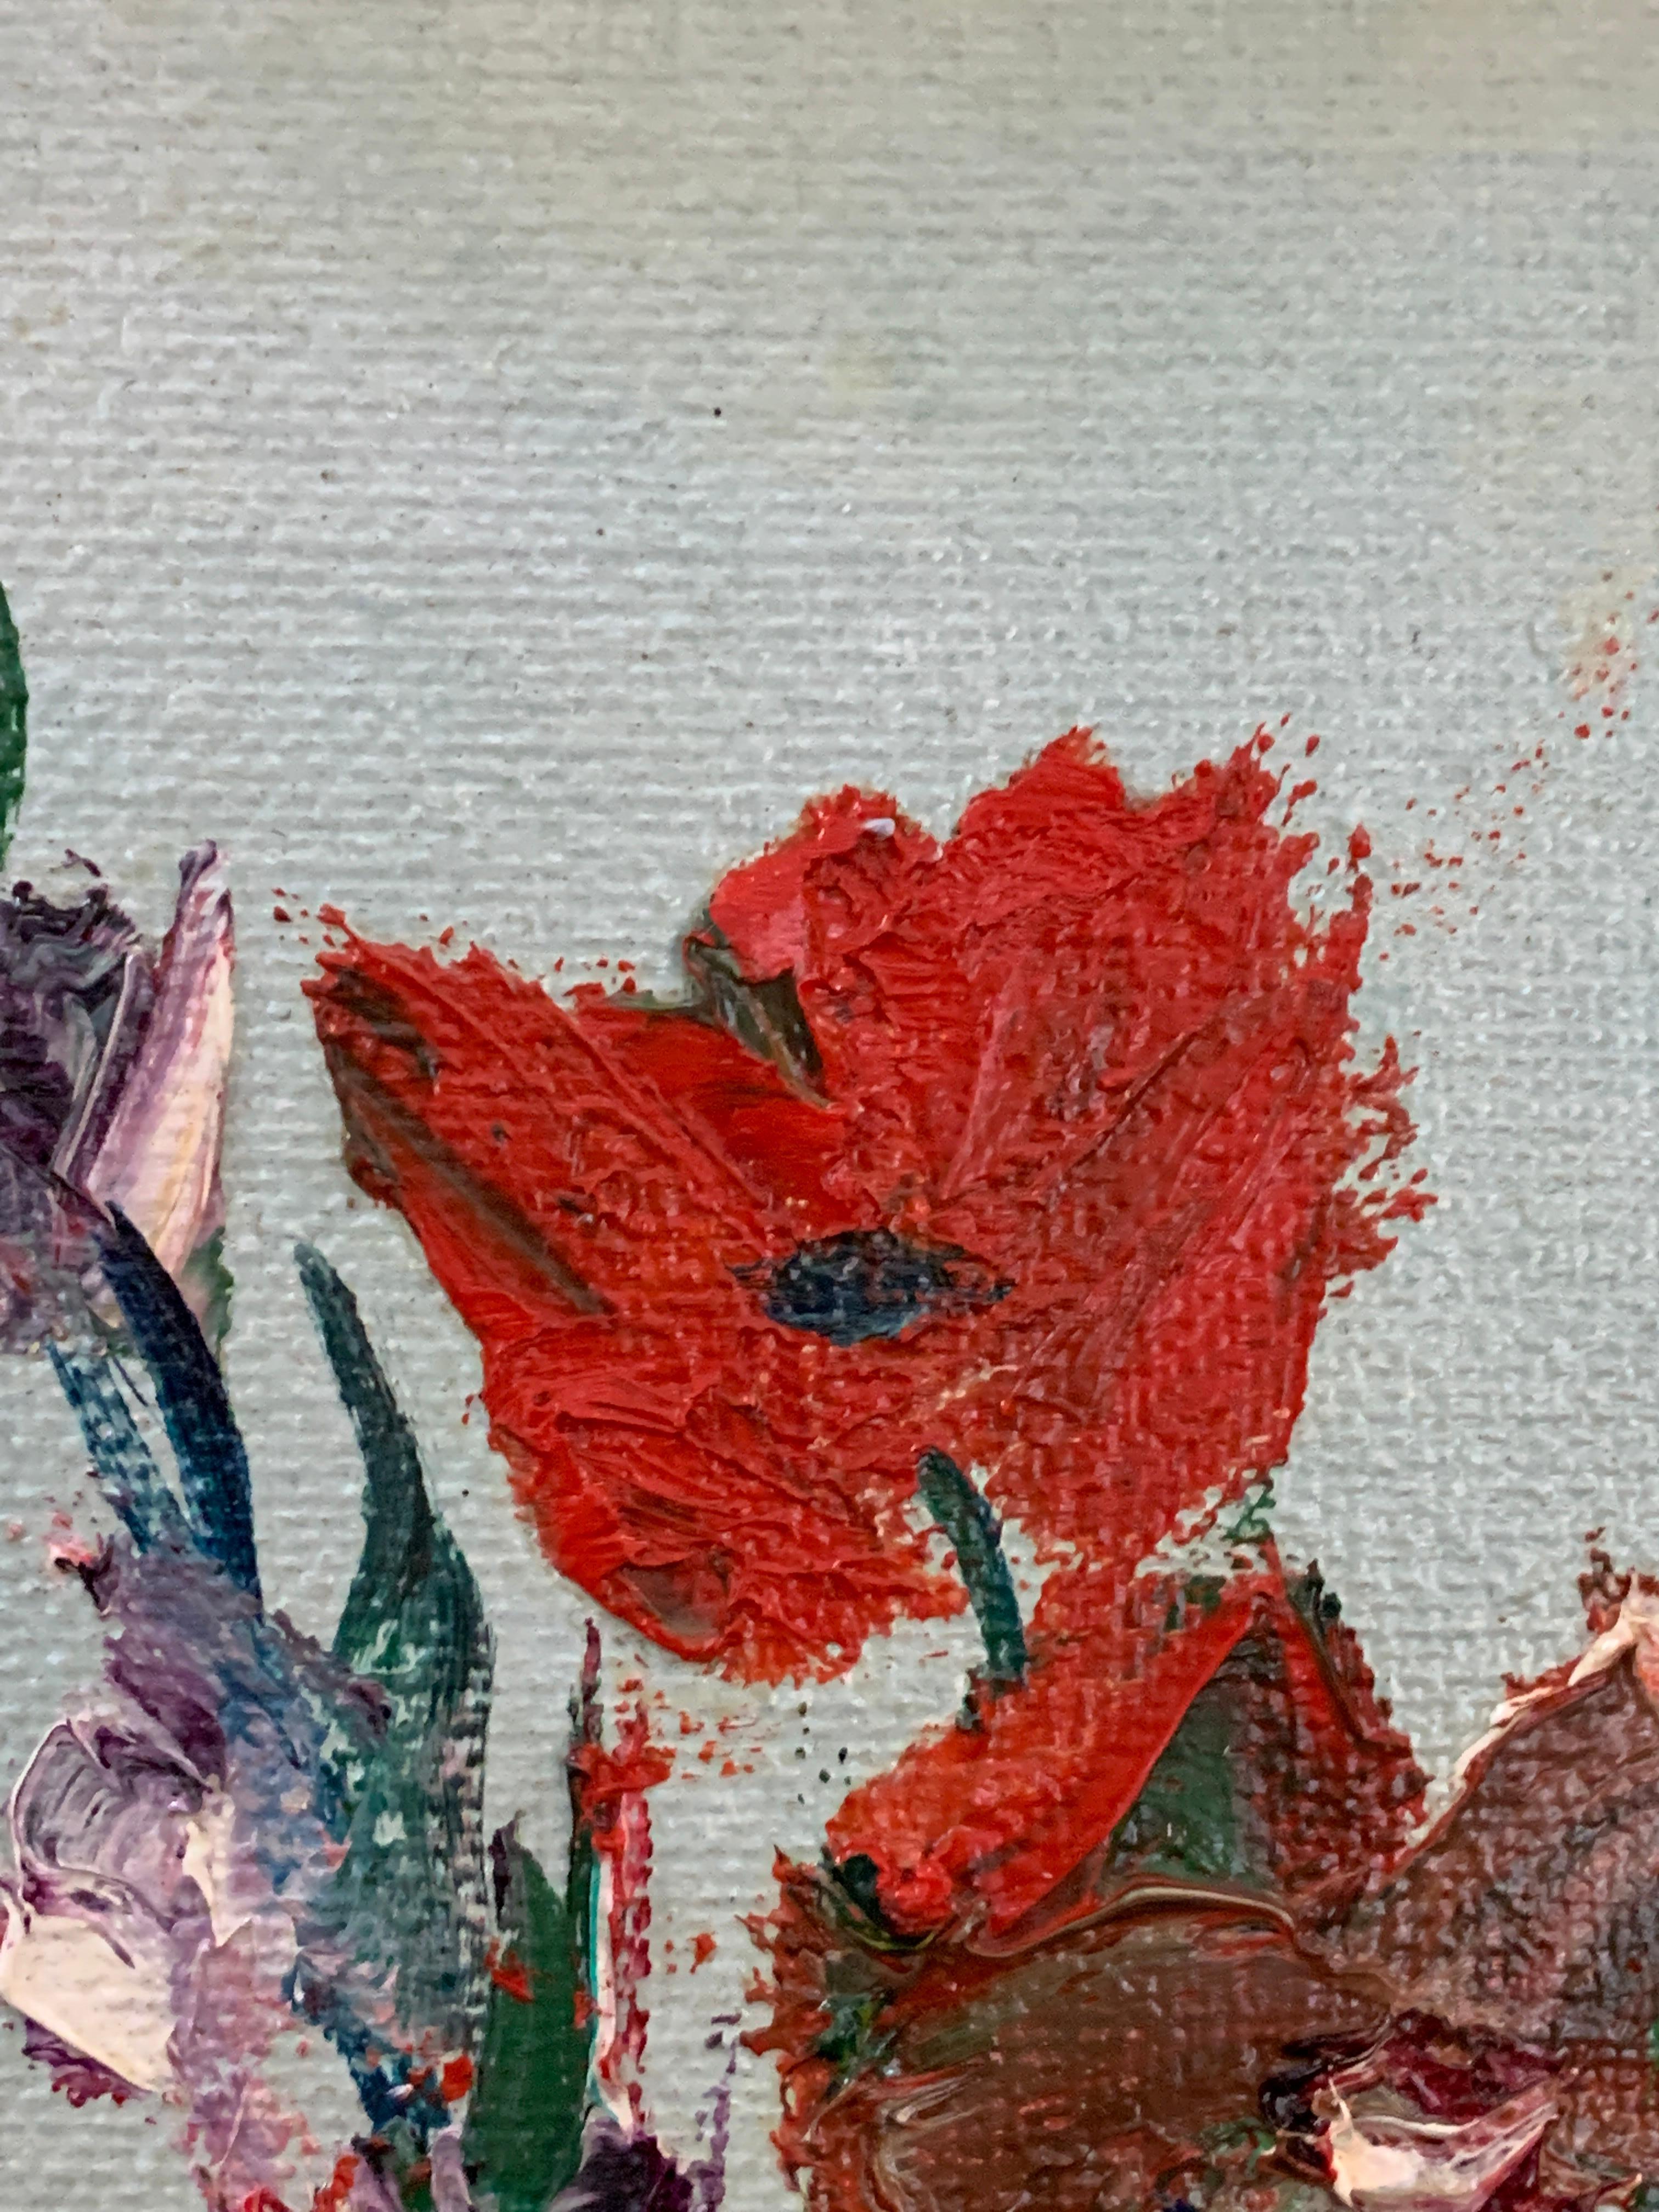 Impressionist mid-century still life of flowers in a vase, with poppies.

This is an oil on canvas and is framed in a vintage English frame. 

The artist was also a restorer and maybe more famous as running a studio of forgers in London, as well as